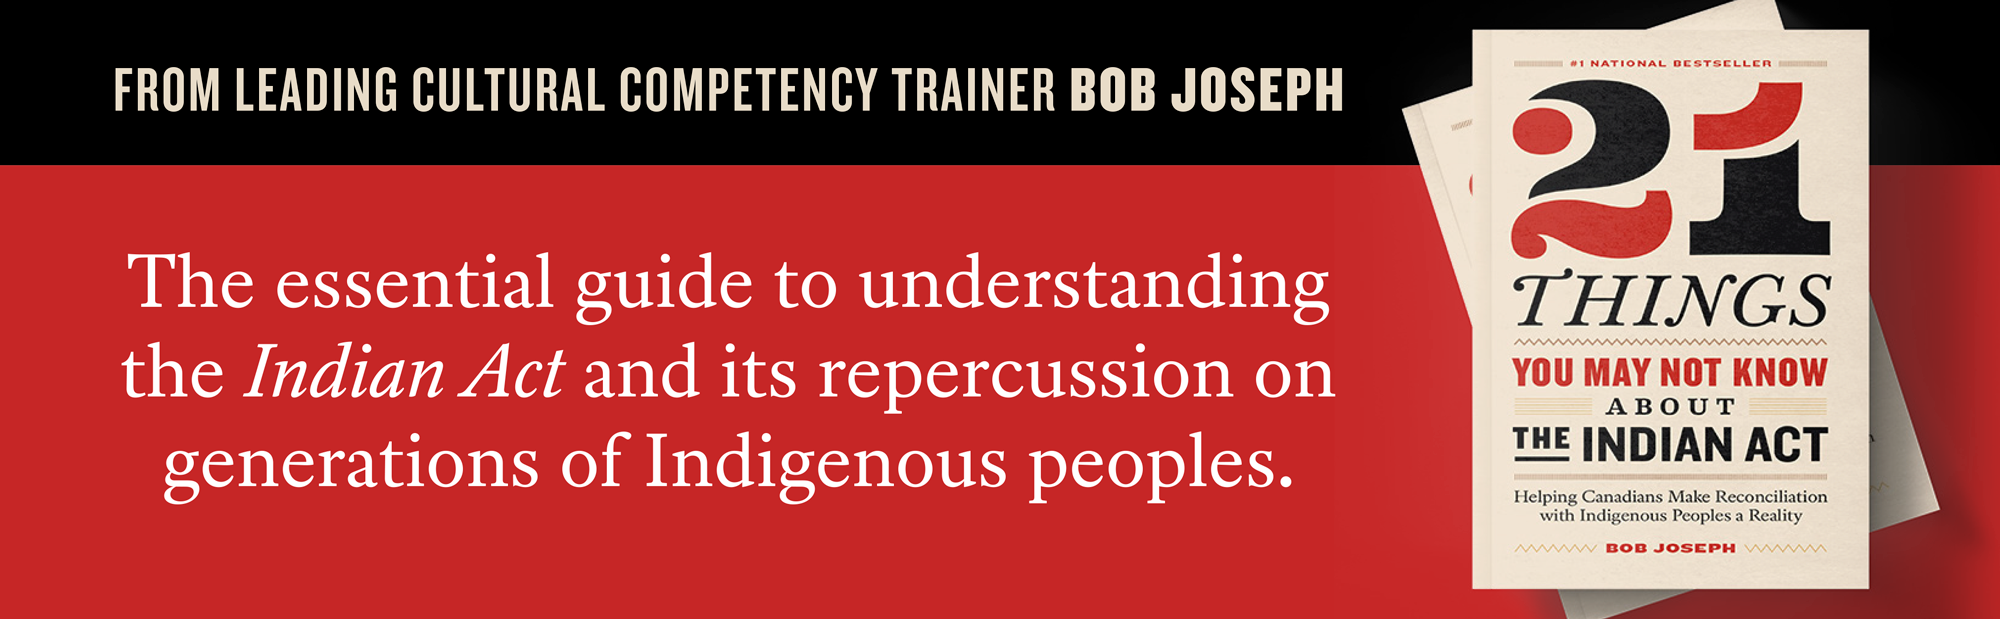 The essential guide to understanding the Indian Act and its repercussion on generations of Indigenous peoples.